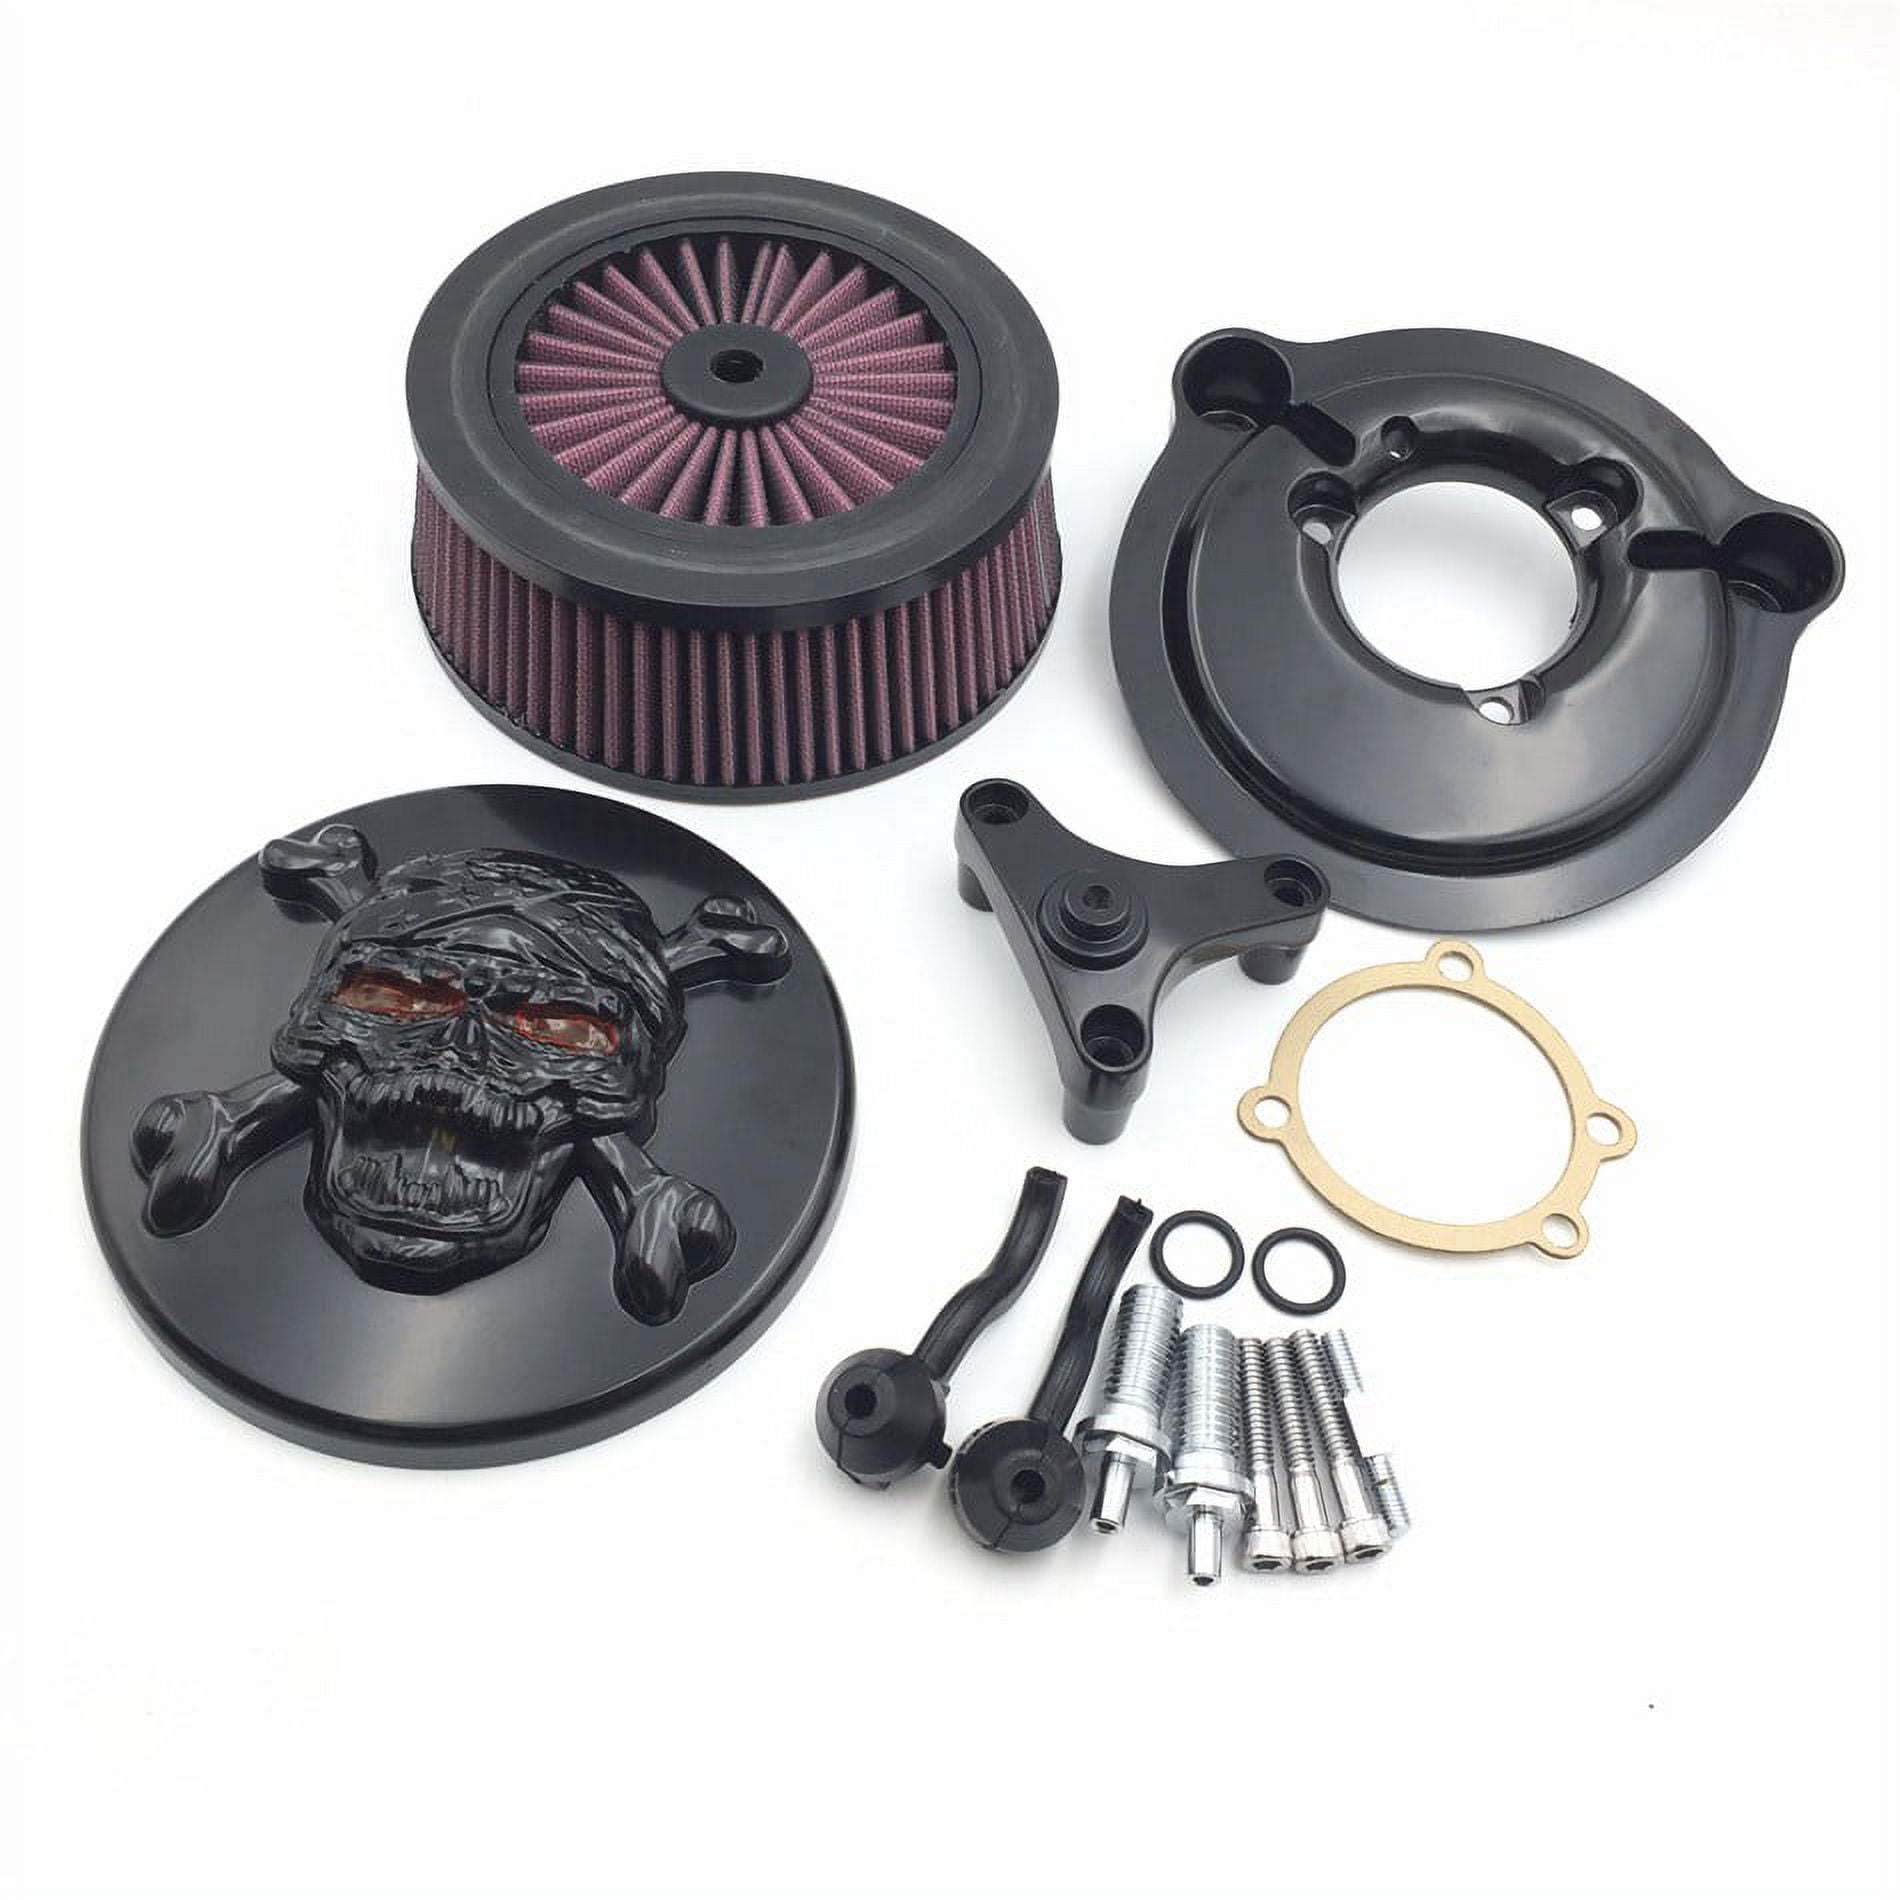 HTT-MOTOR Motorcycle Black Skull Zombie with Cross Bones Air Cleaner Intake  Filter System Kit For Harley Davidson 2007-later XL Sportster 1200 Nightster  883 XL883 Low XL1200L Seventy Two Forty Eight 